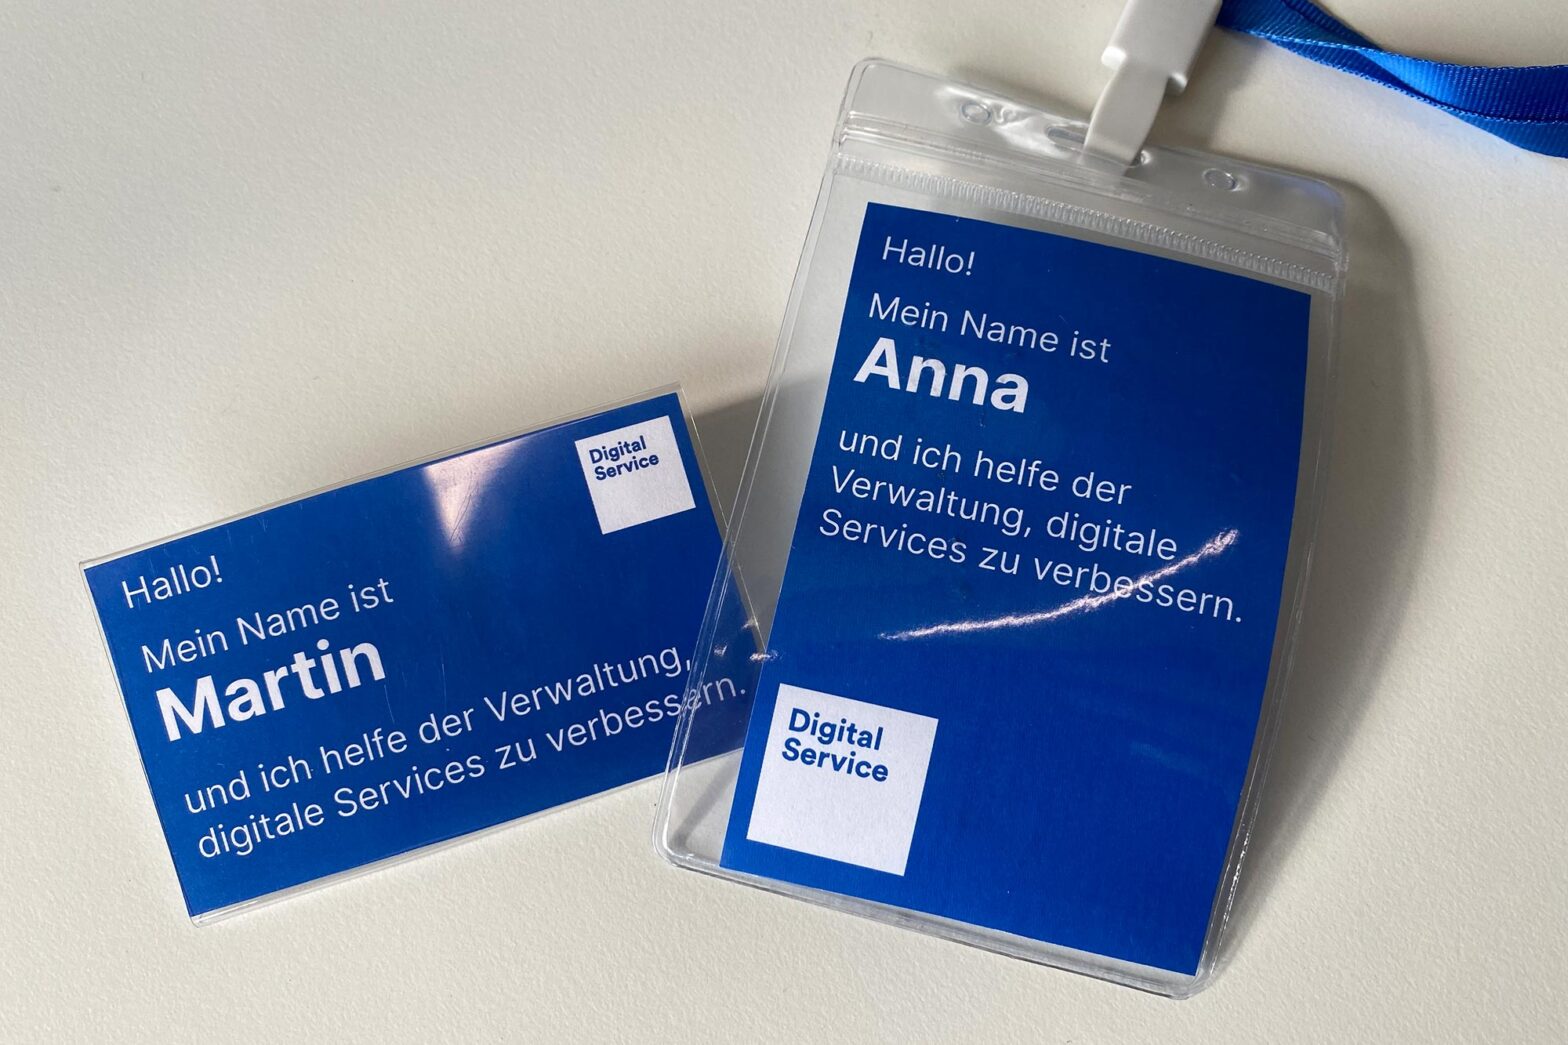 Two name badges for Martin and Anna next to each other saying in German: ‘Hello! My name is … I help government improve public services’ with the logo of the Digital Service.